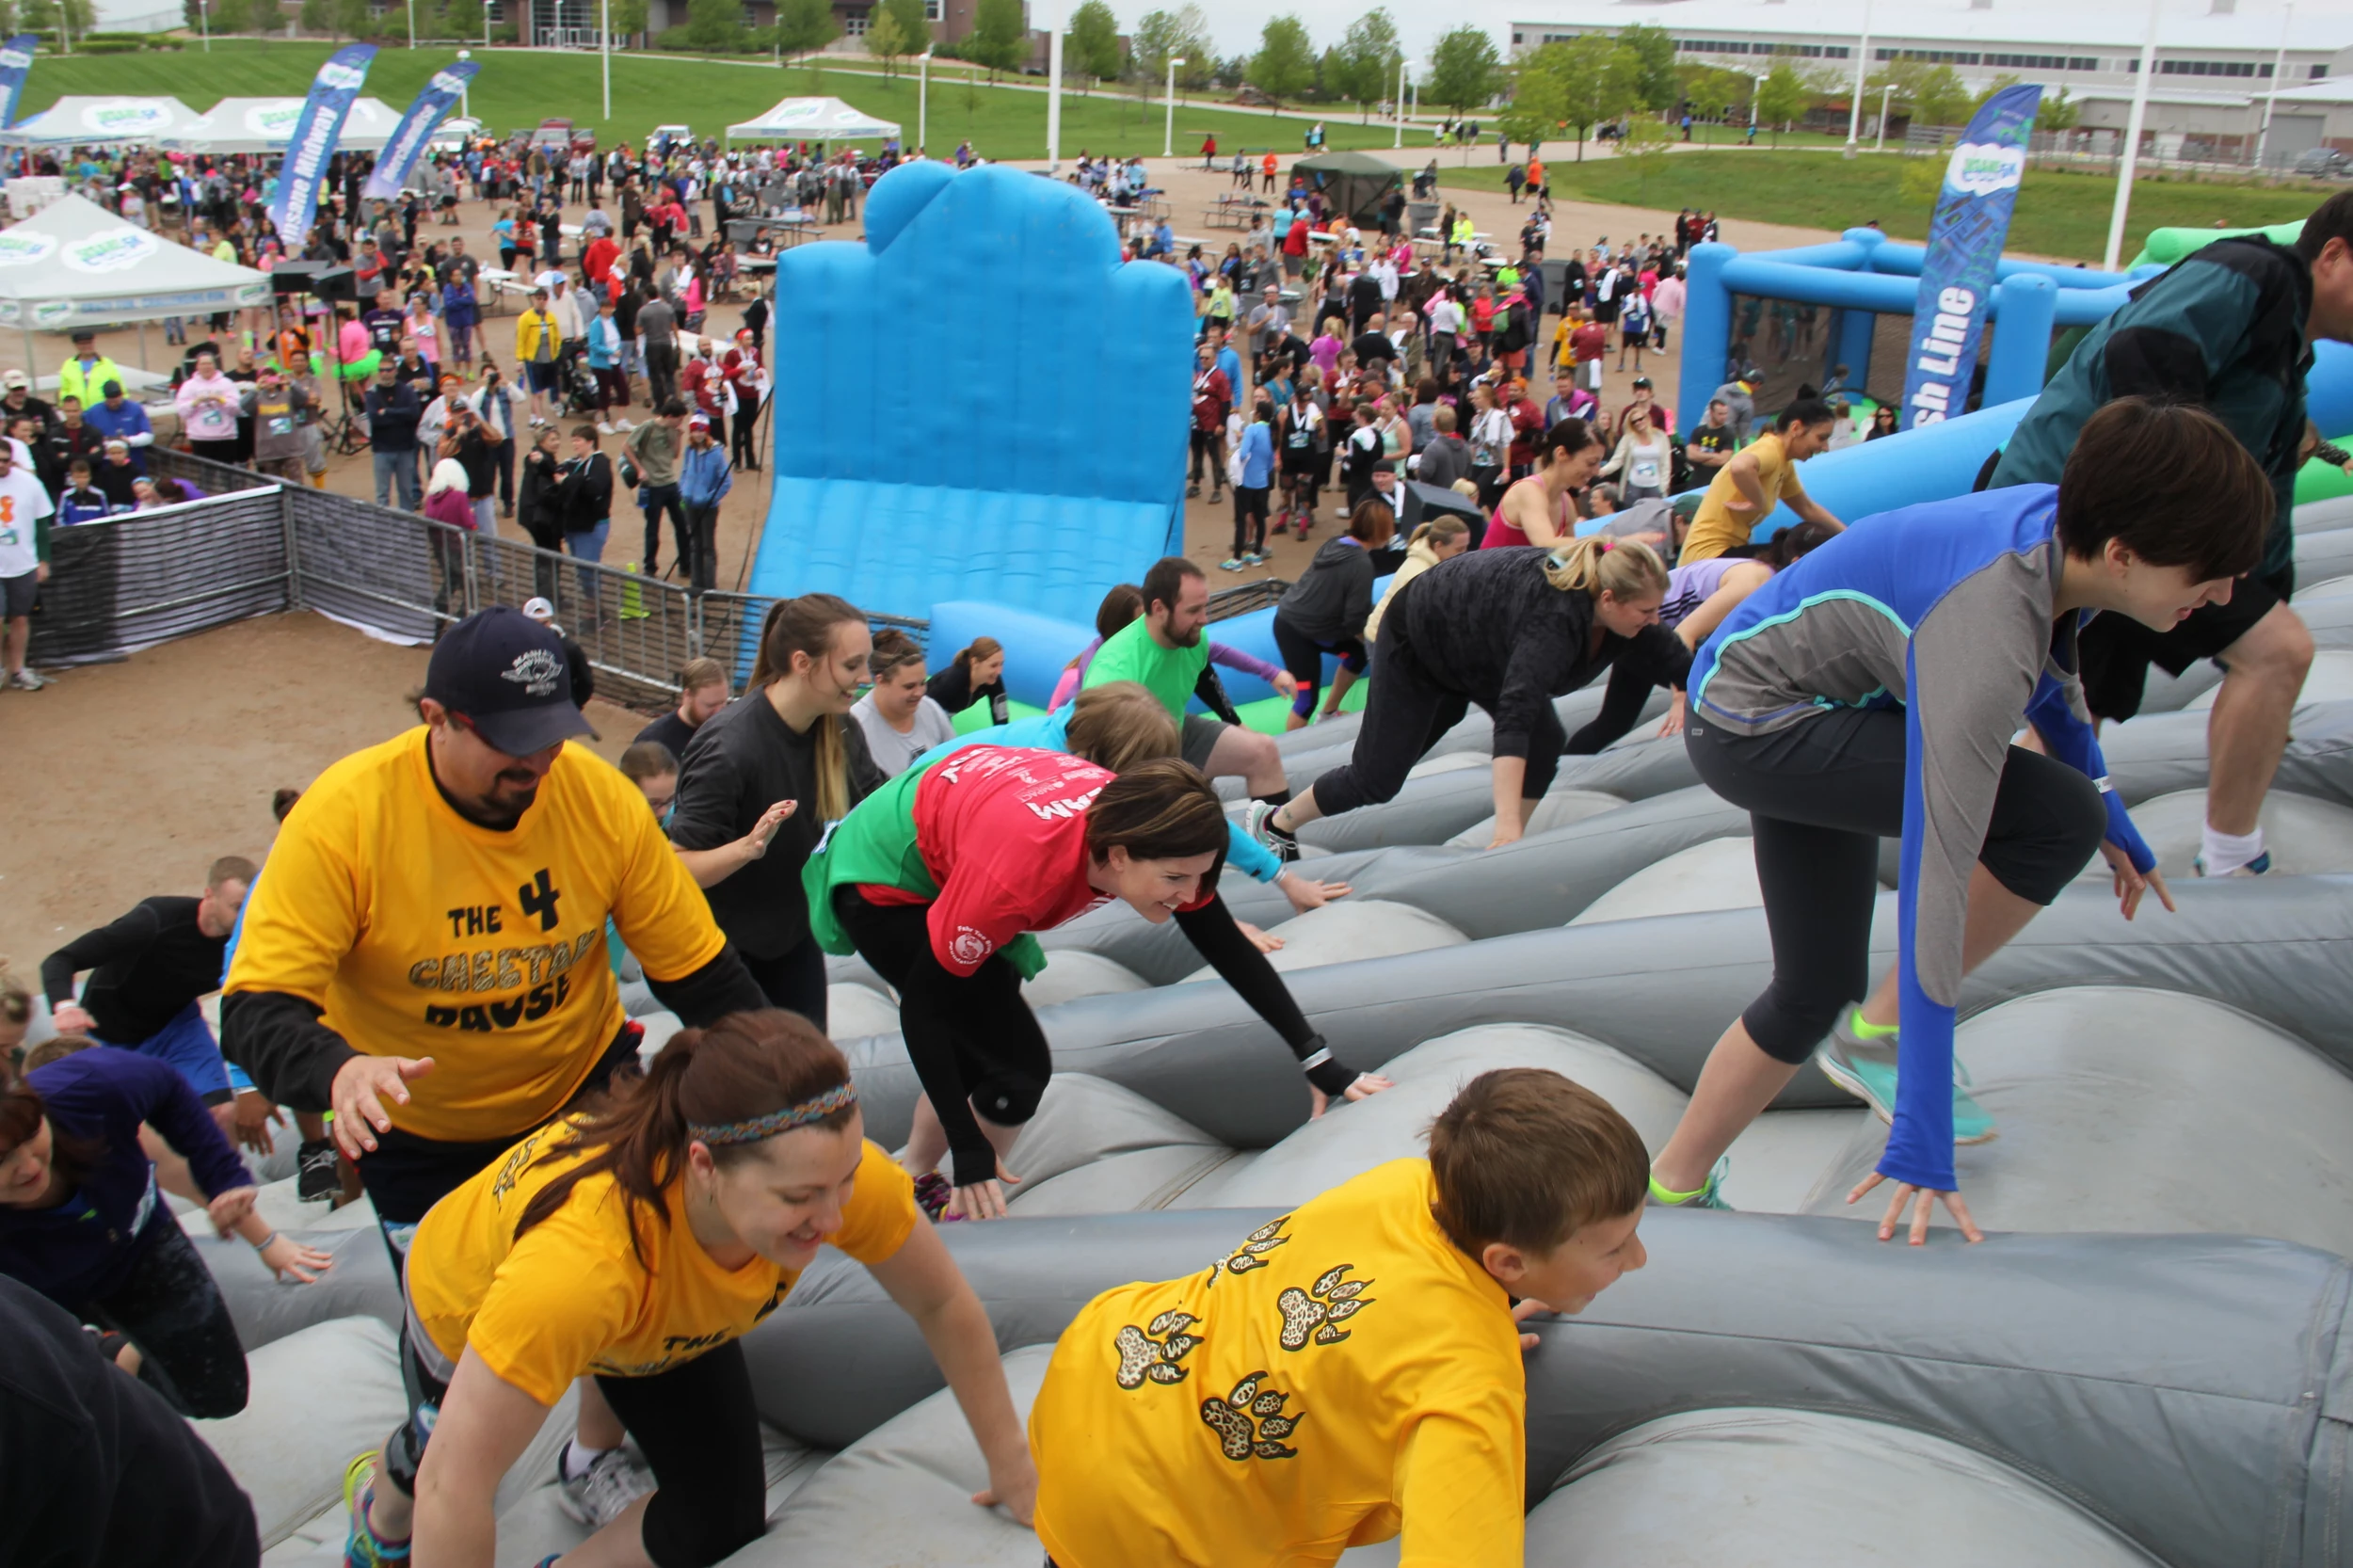 Sign Up For the Insane Inflatables 5K Now to Save Money